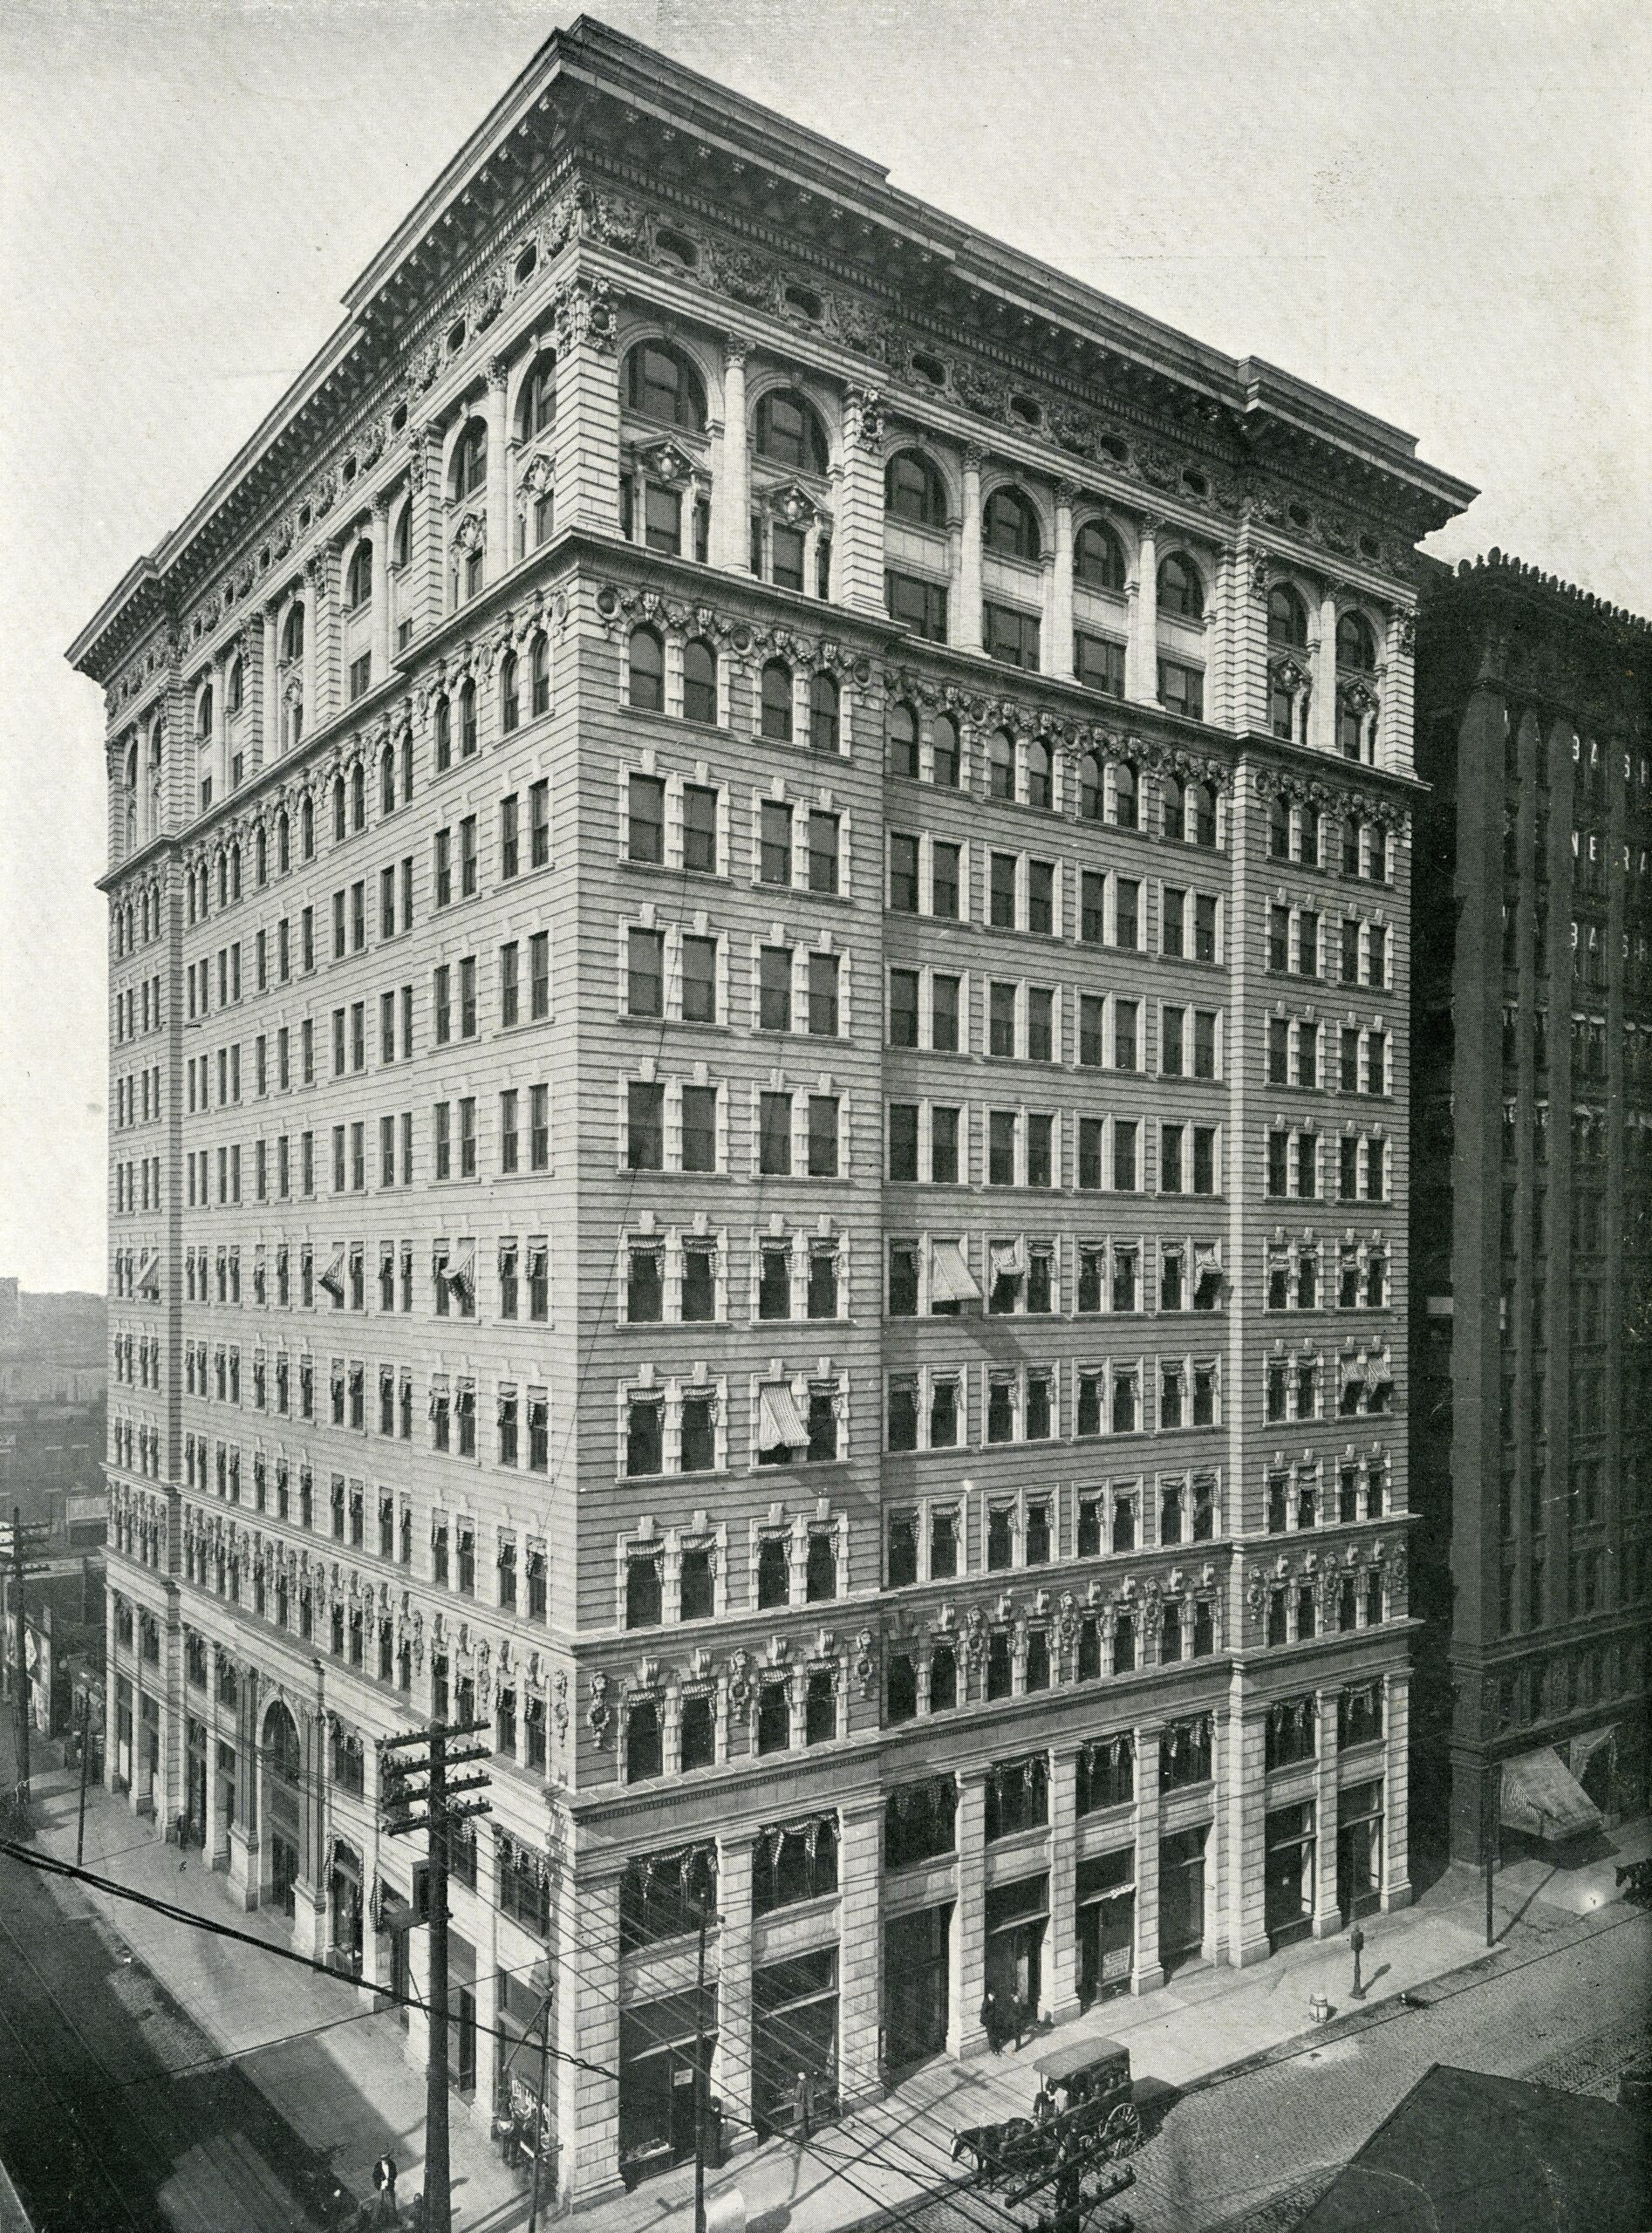 Archival image of the Buder Building from 1902 in St. Louis, Missouri.